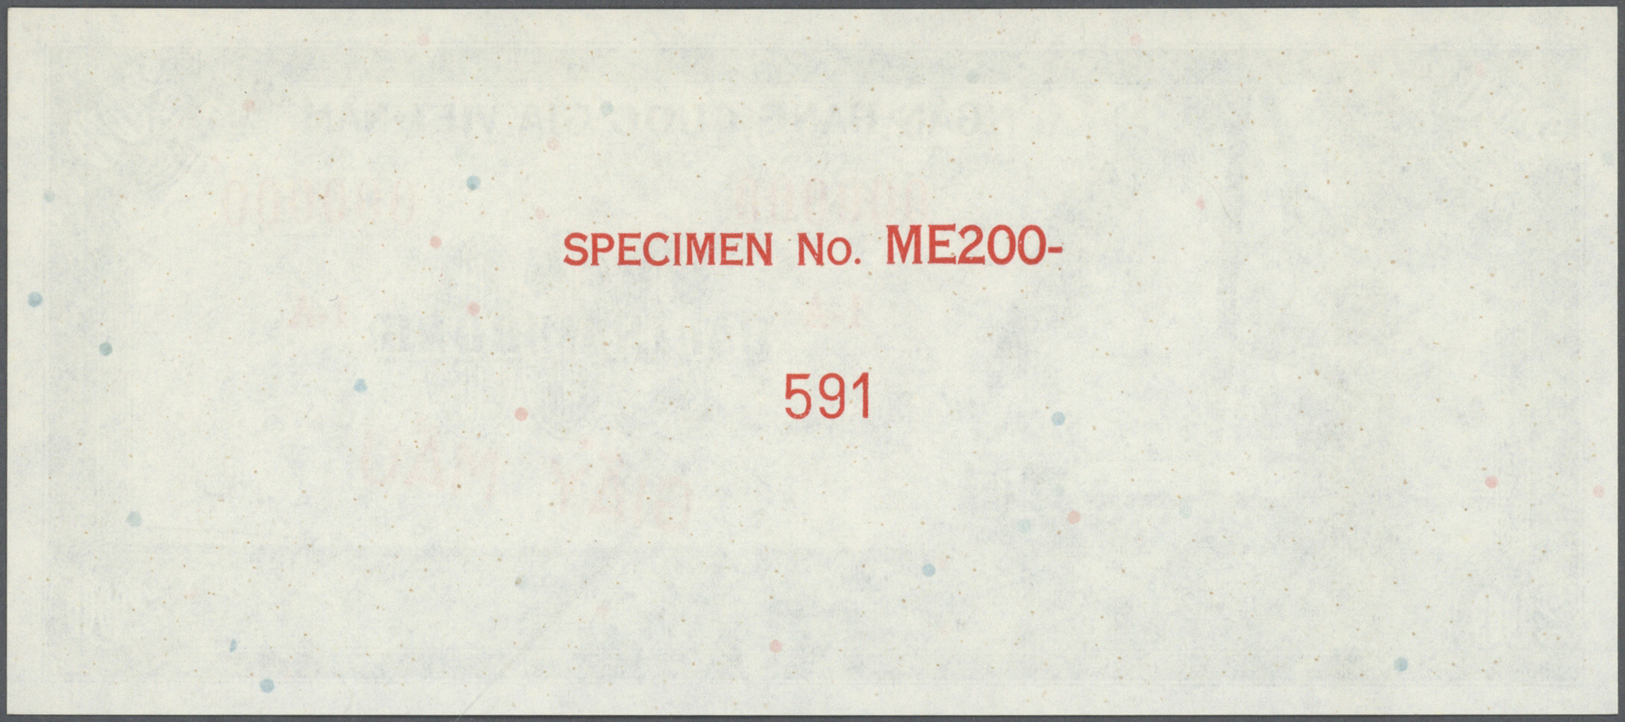 02967 South Vietnam / Süd Vietnam: large set of 11 separately printed front and back side proofs (total 22 proofs font &